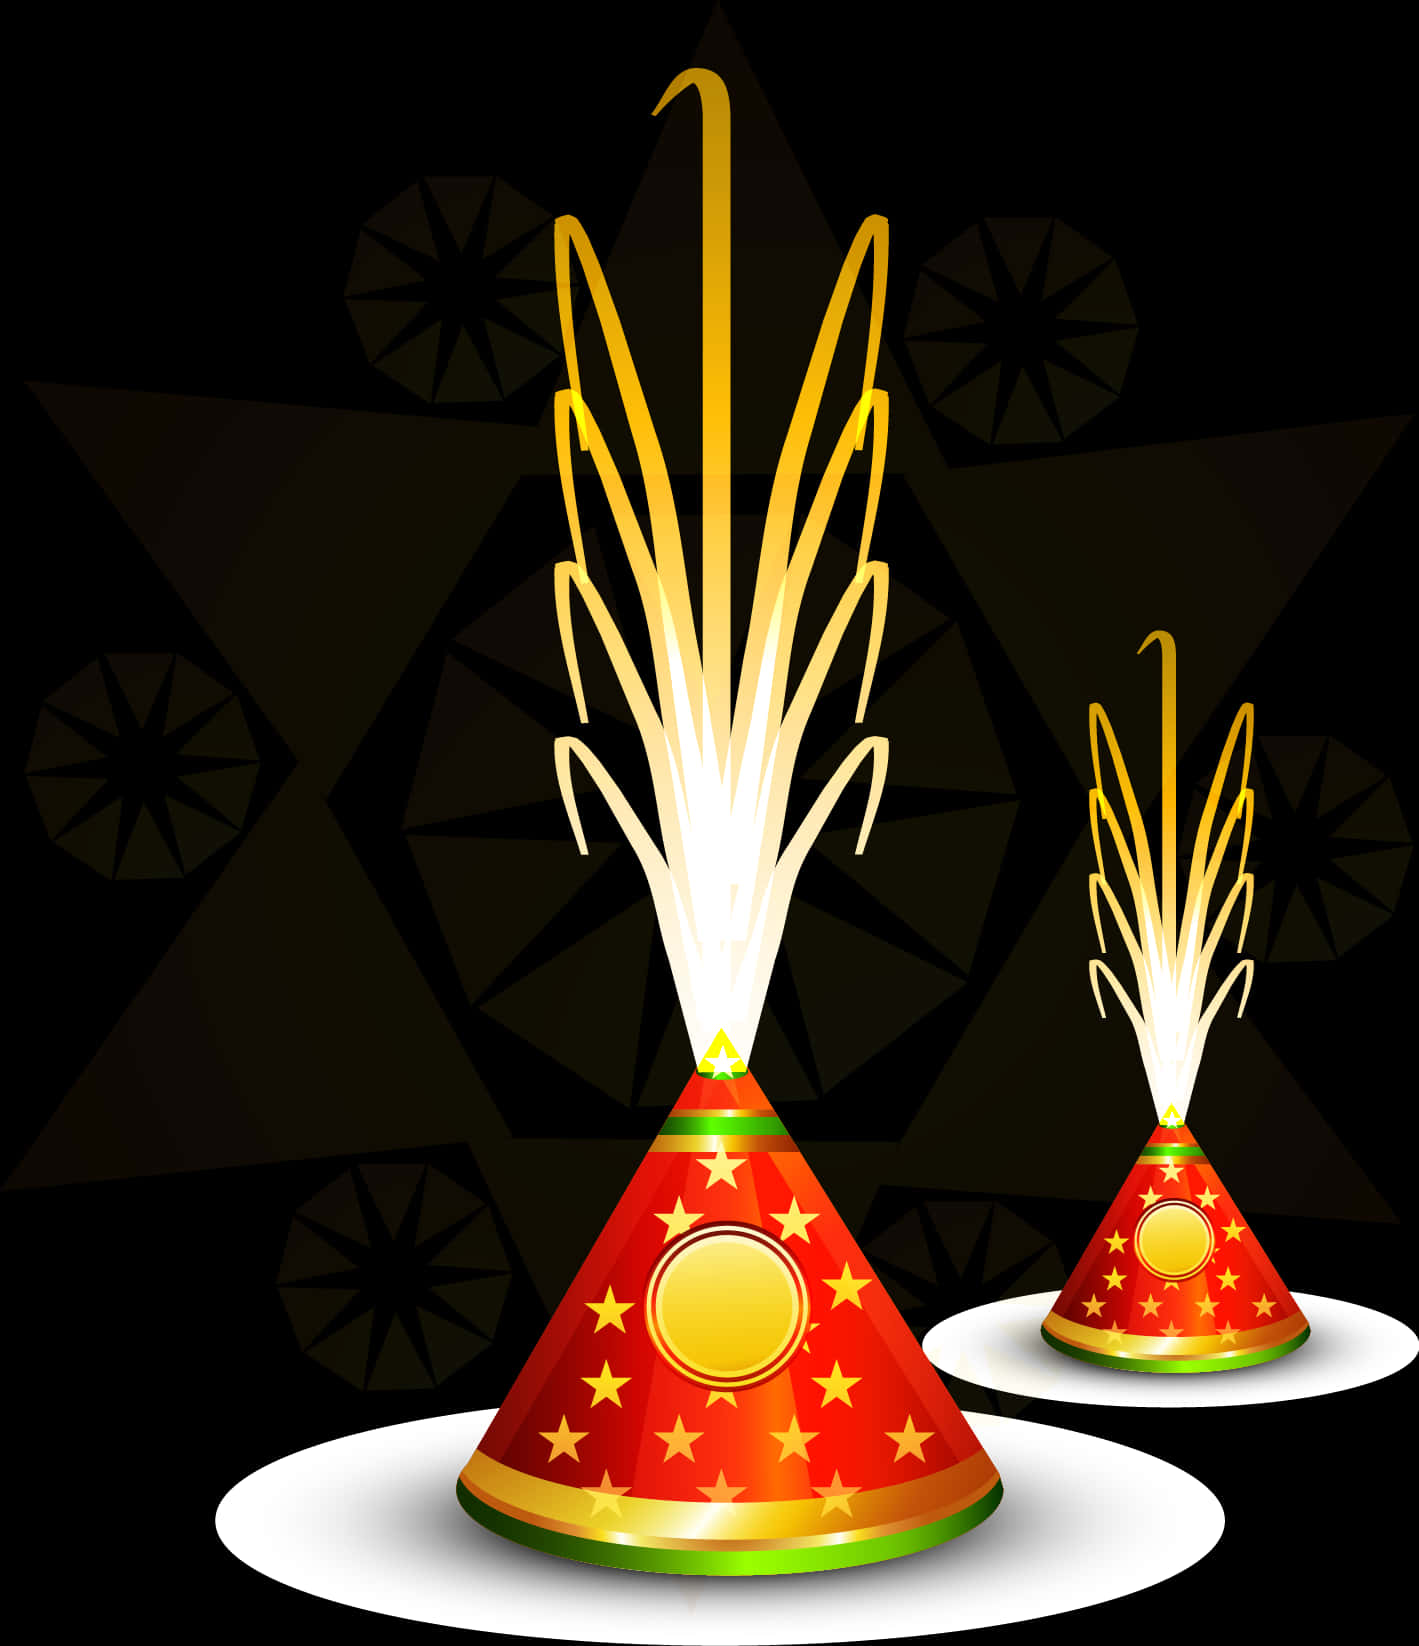 A Red And Yellow Cone Shaped Objects With A Gold Design